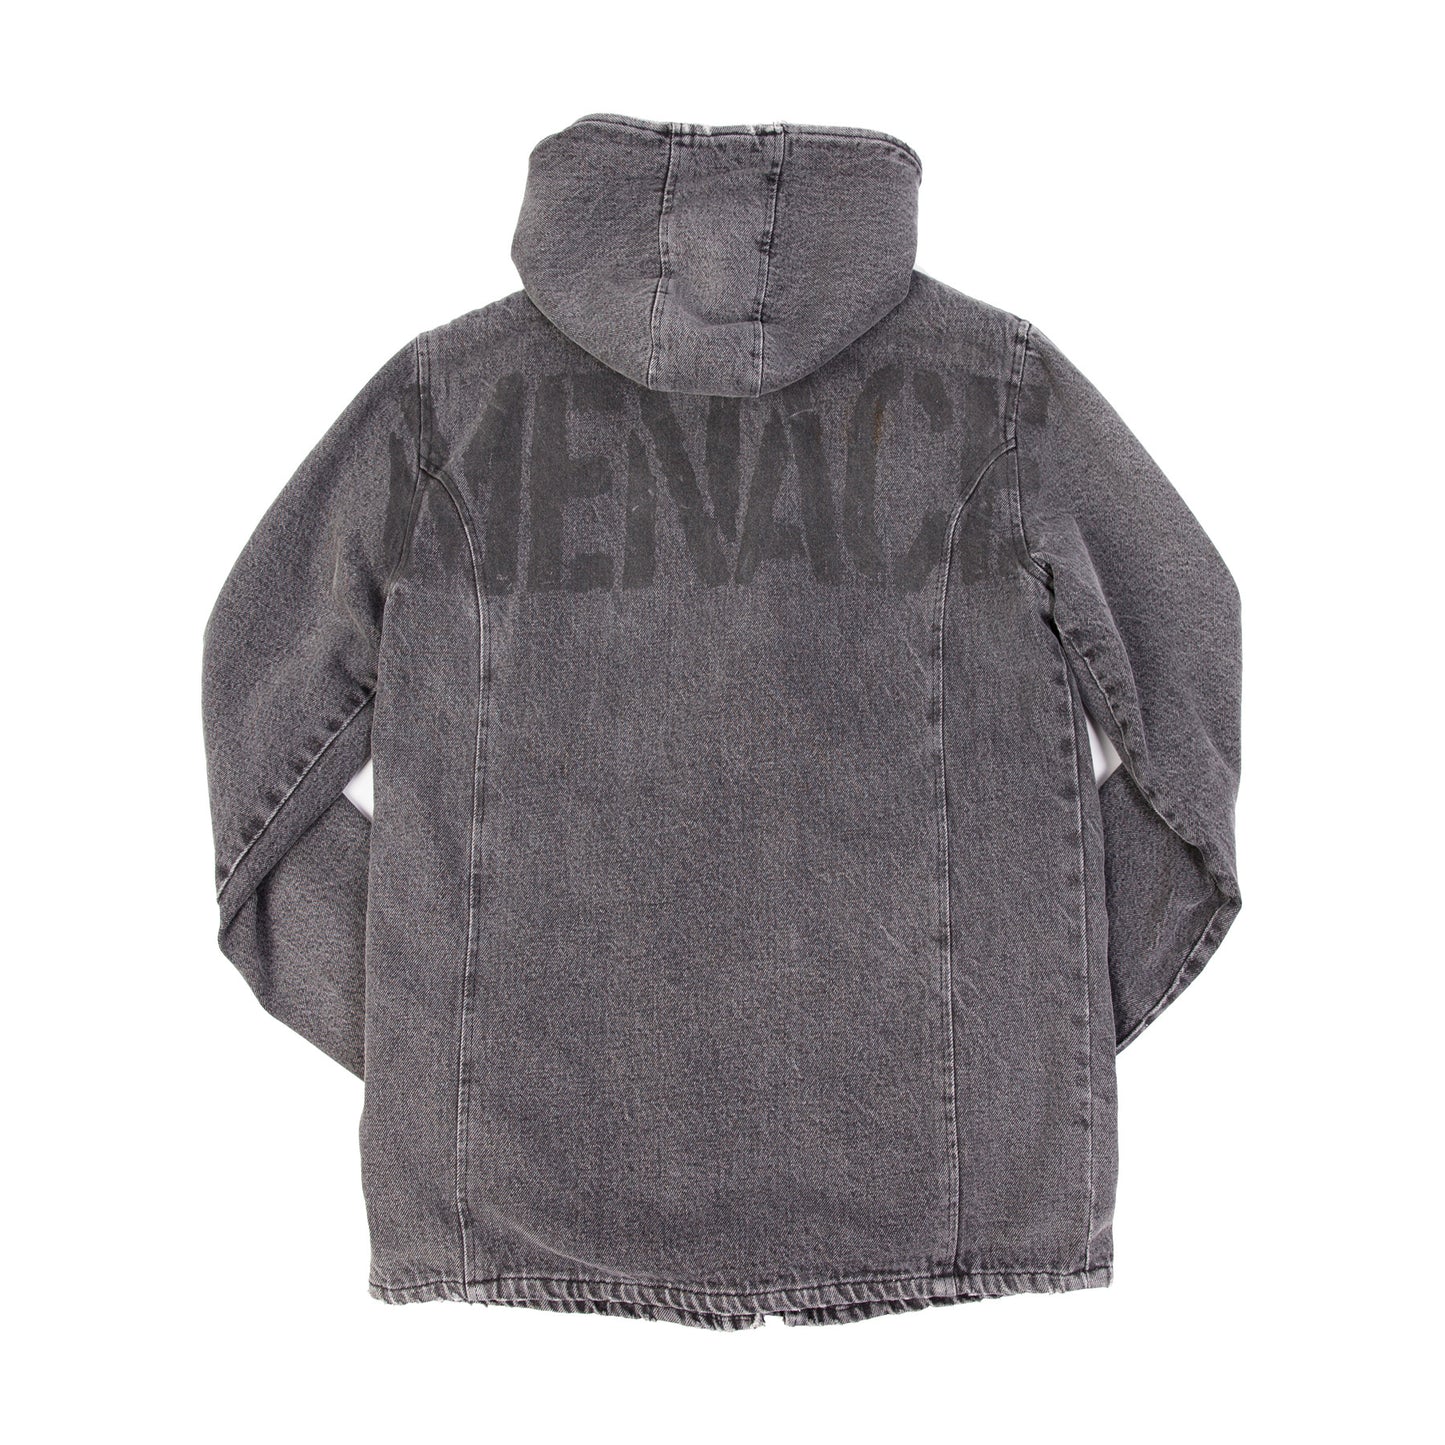 STENCIL HOODED MILITARY PARKA by MENACE